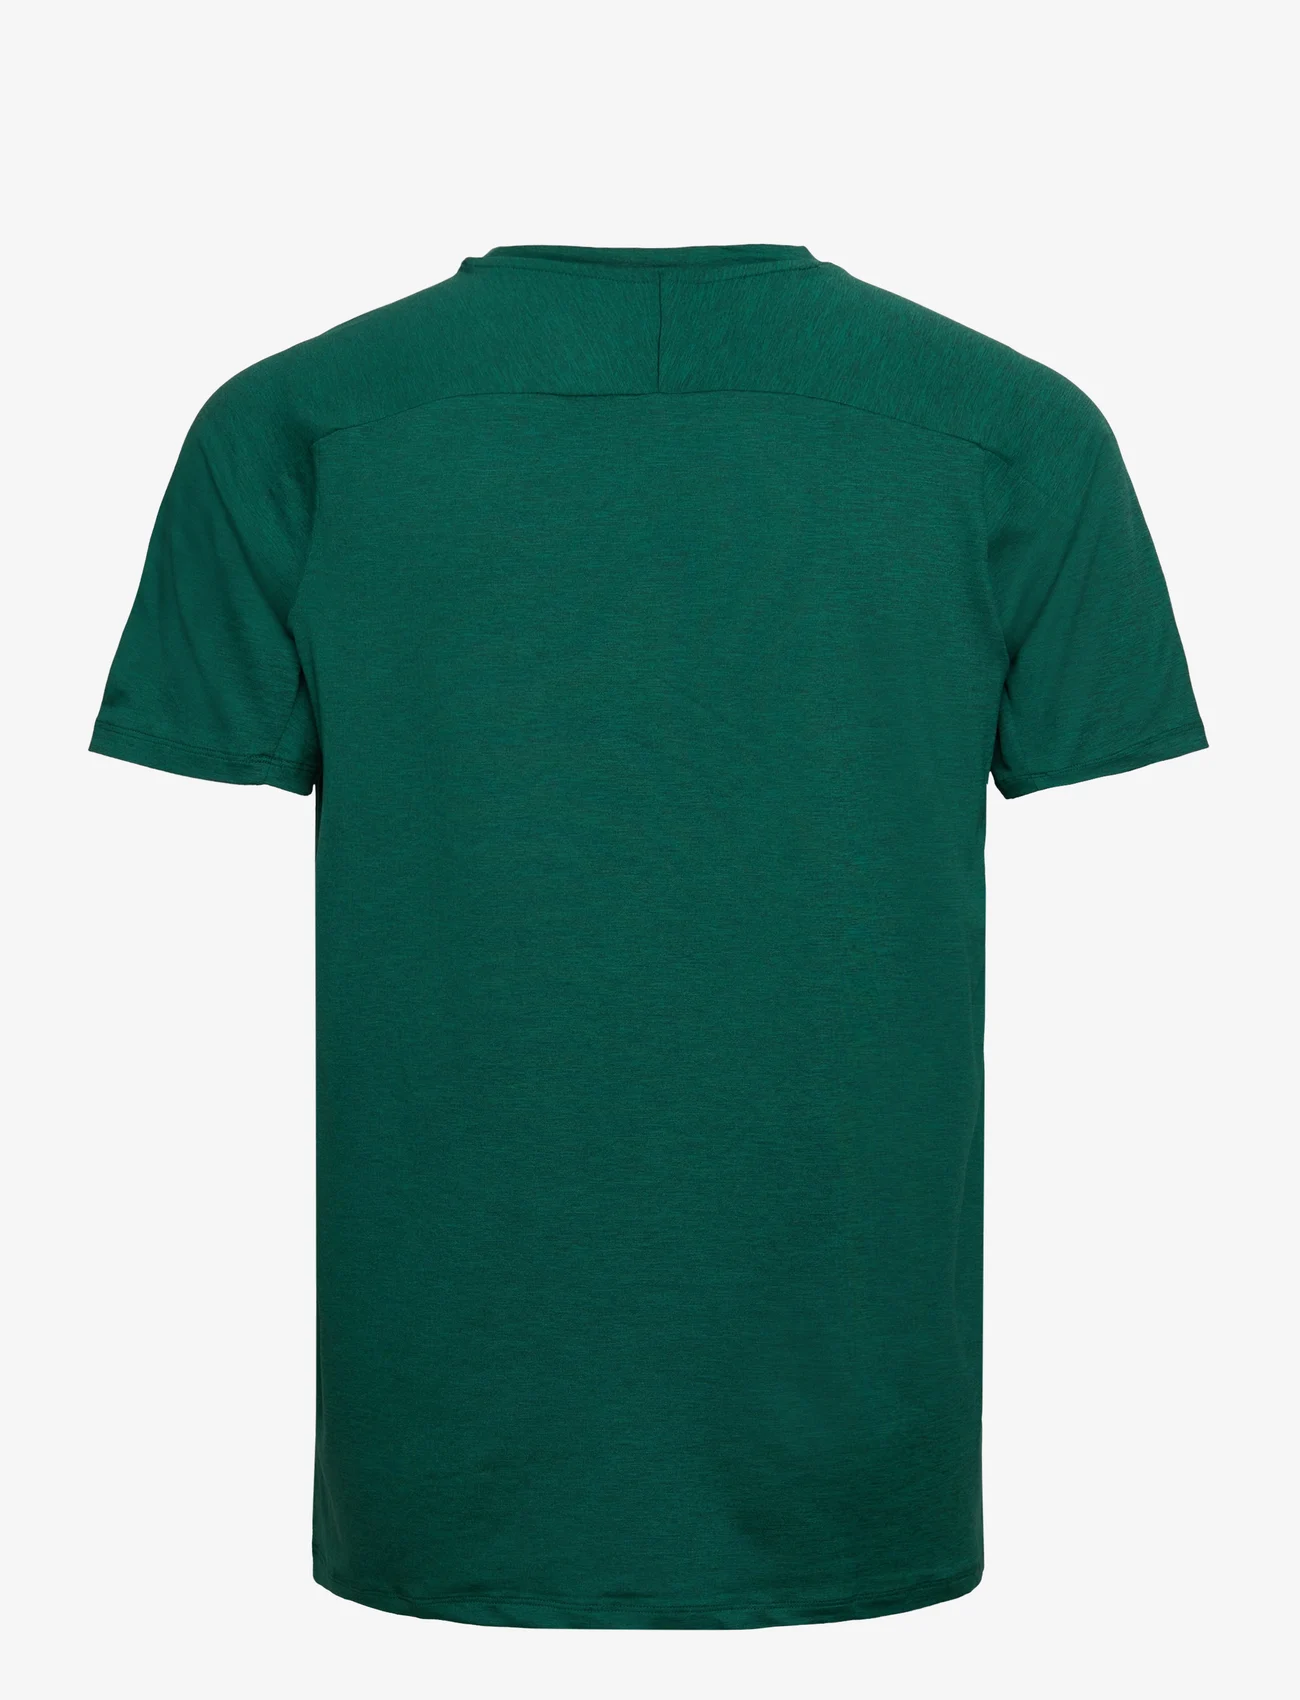 2XU - MOTION TEE - t-shirts - forest green/black - 1